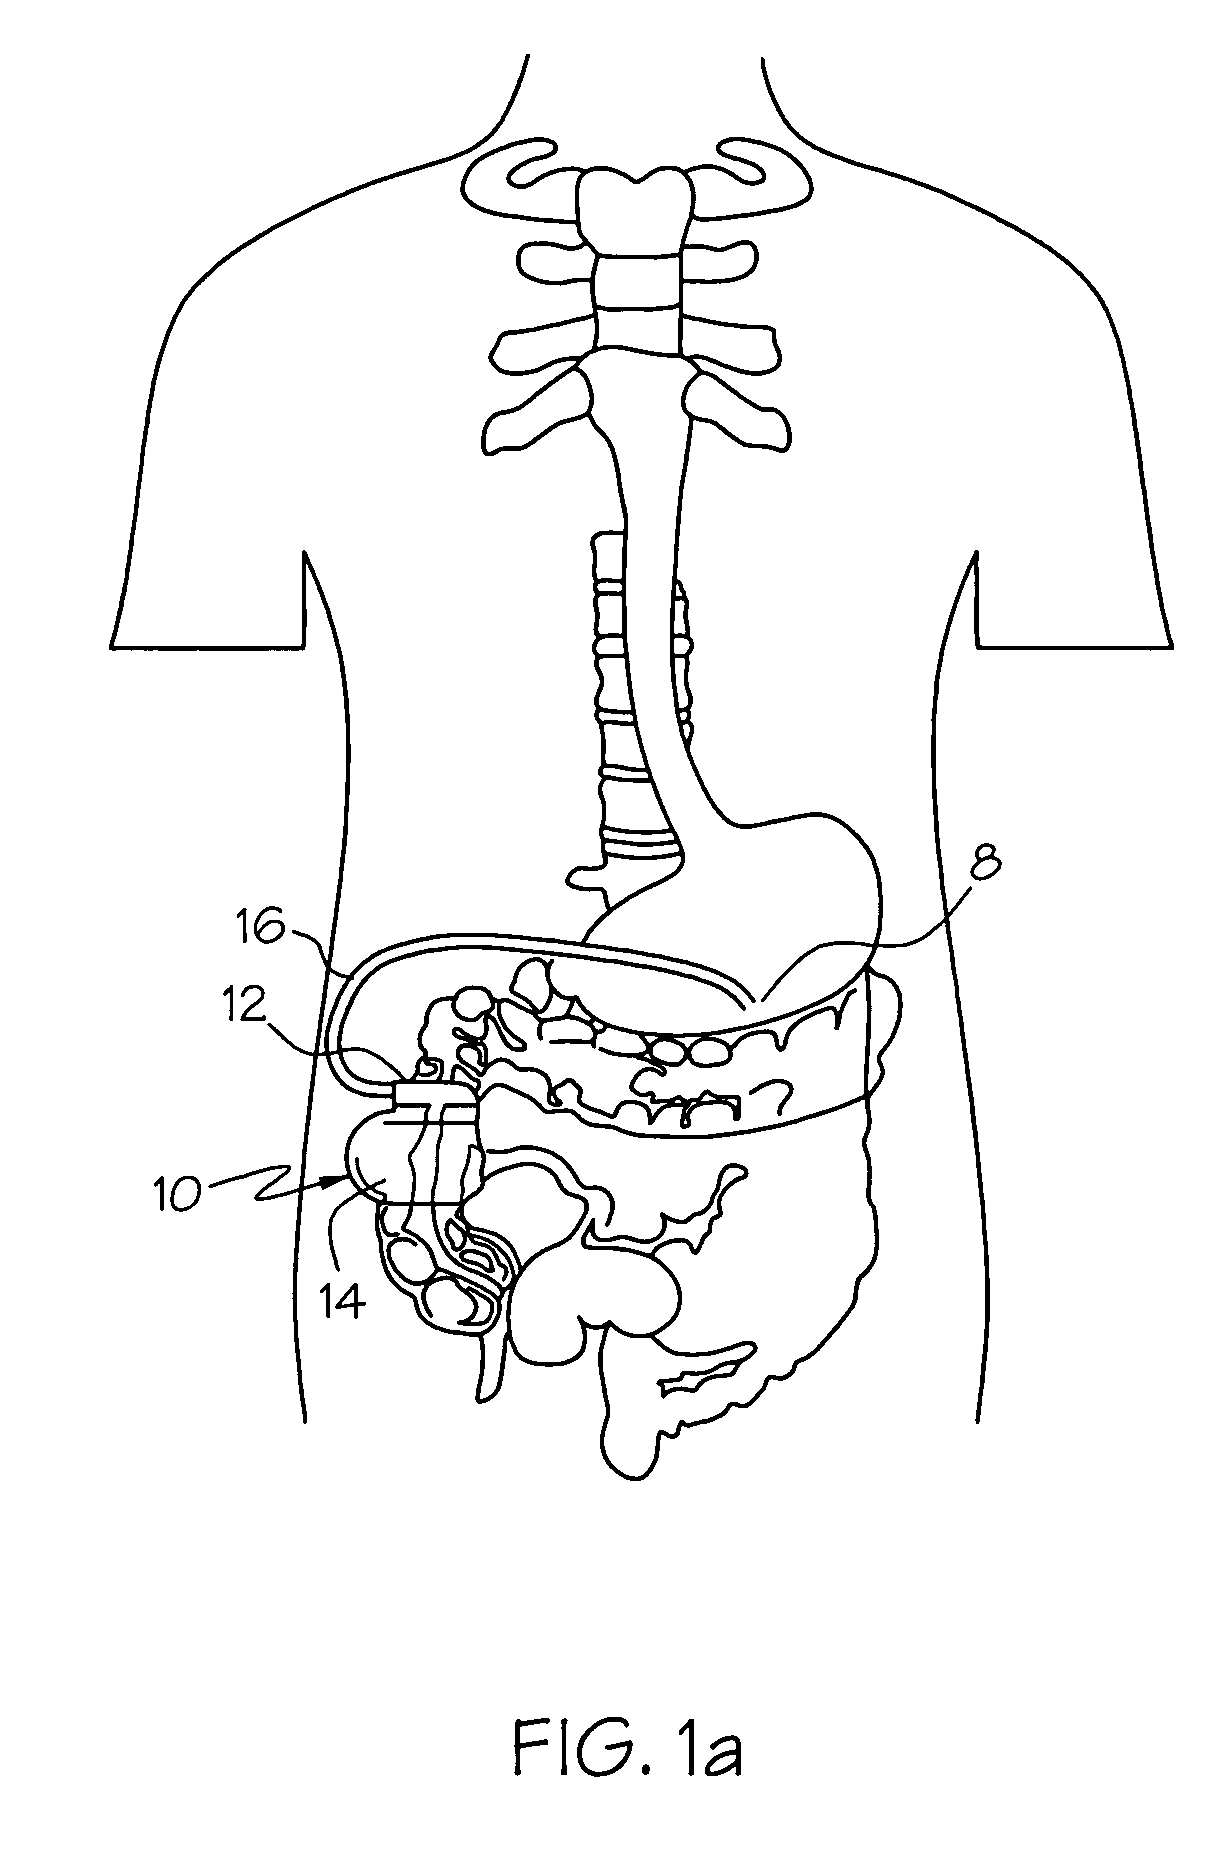 Gastro-electric stimulation for reducing the acidity of gastric secretions or reducing the amounts thereof